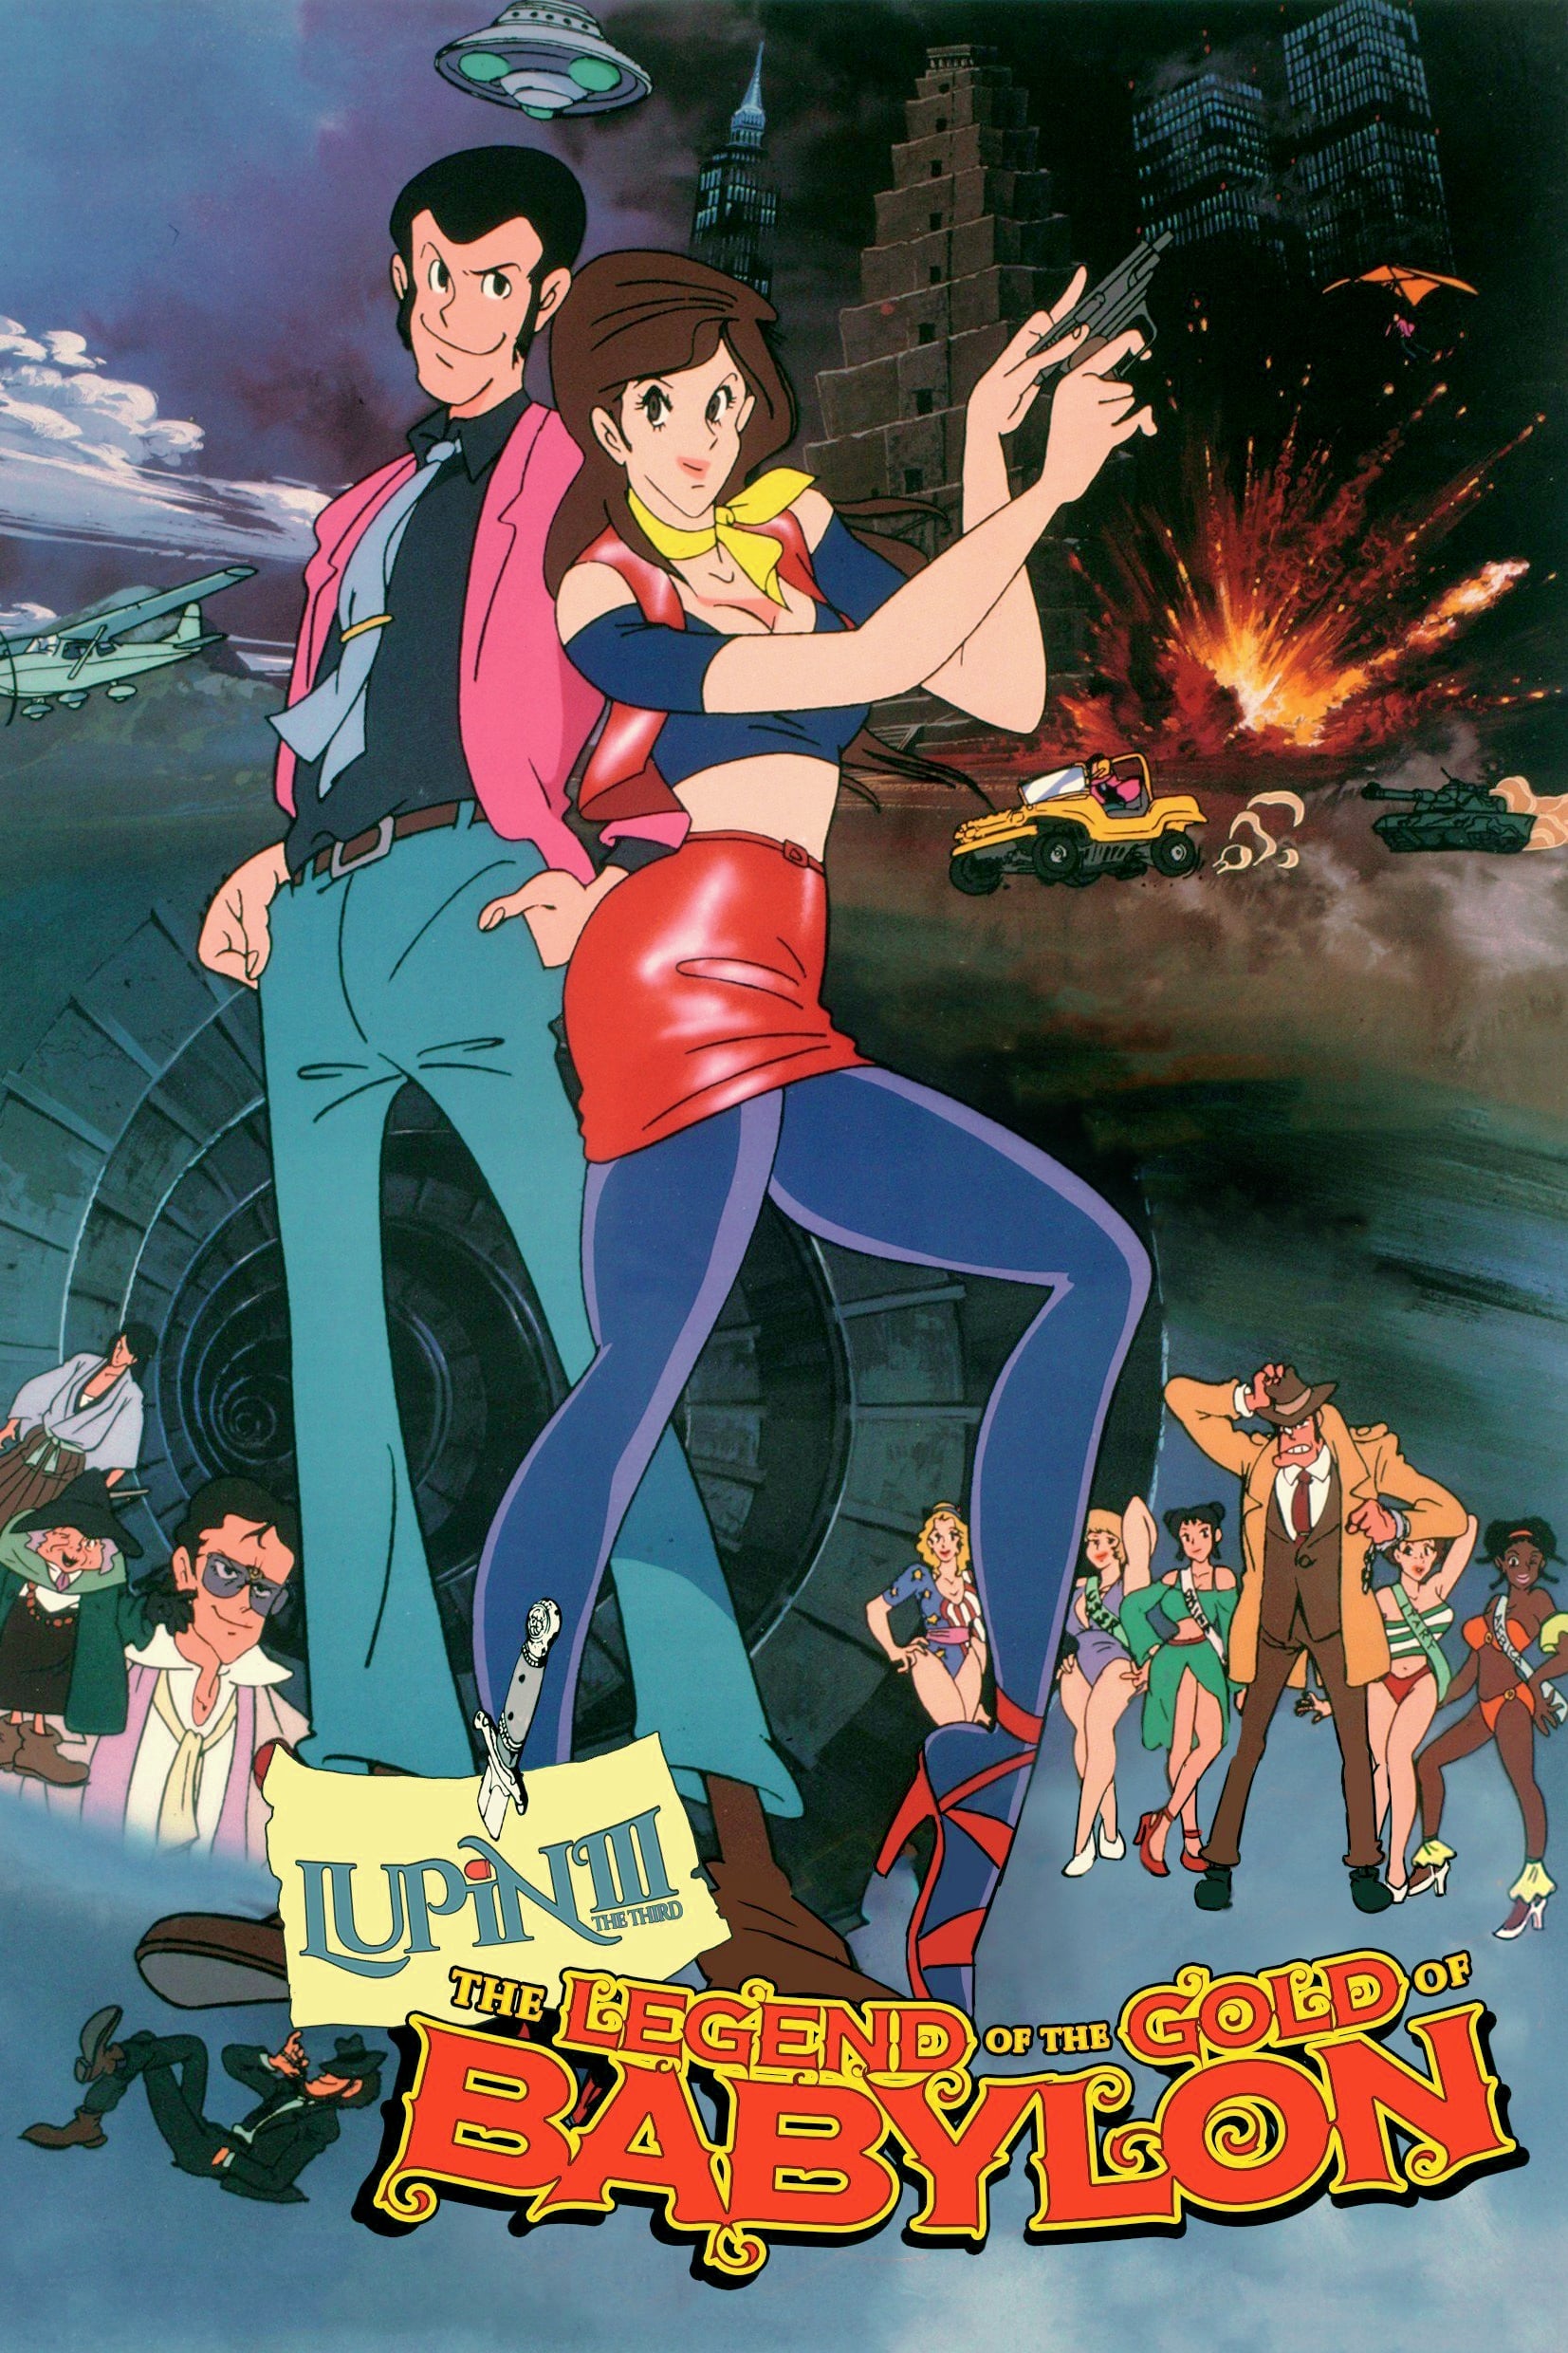 Lupin the Third: The Legend of the Gold of Babylon (1985)